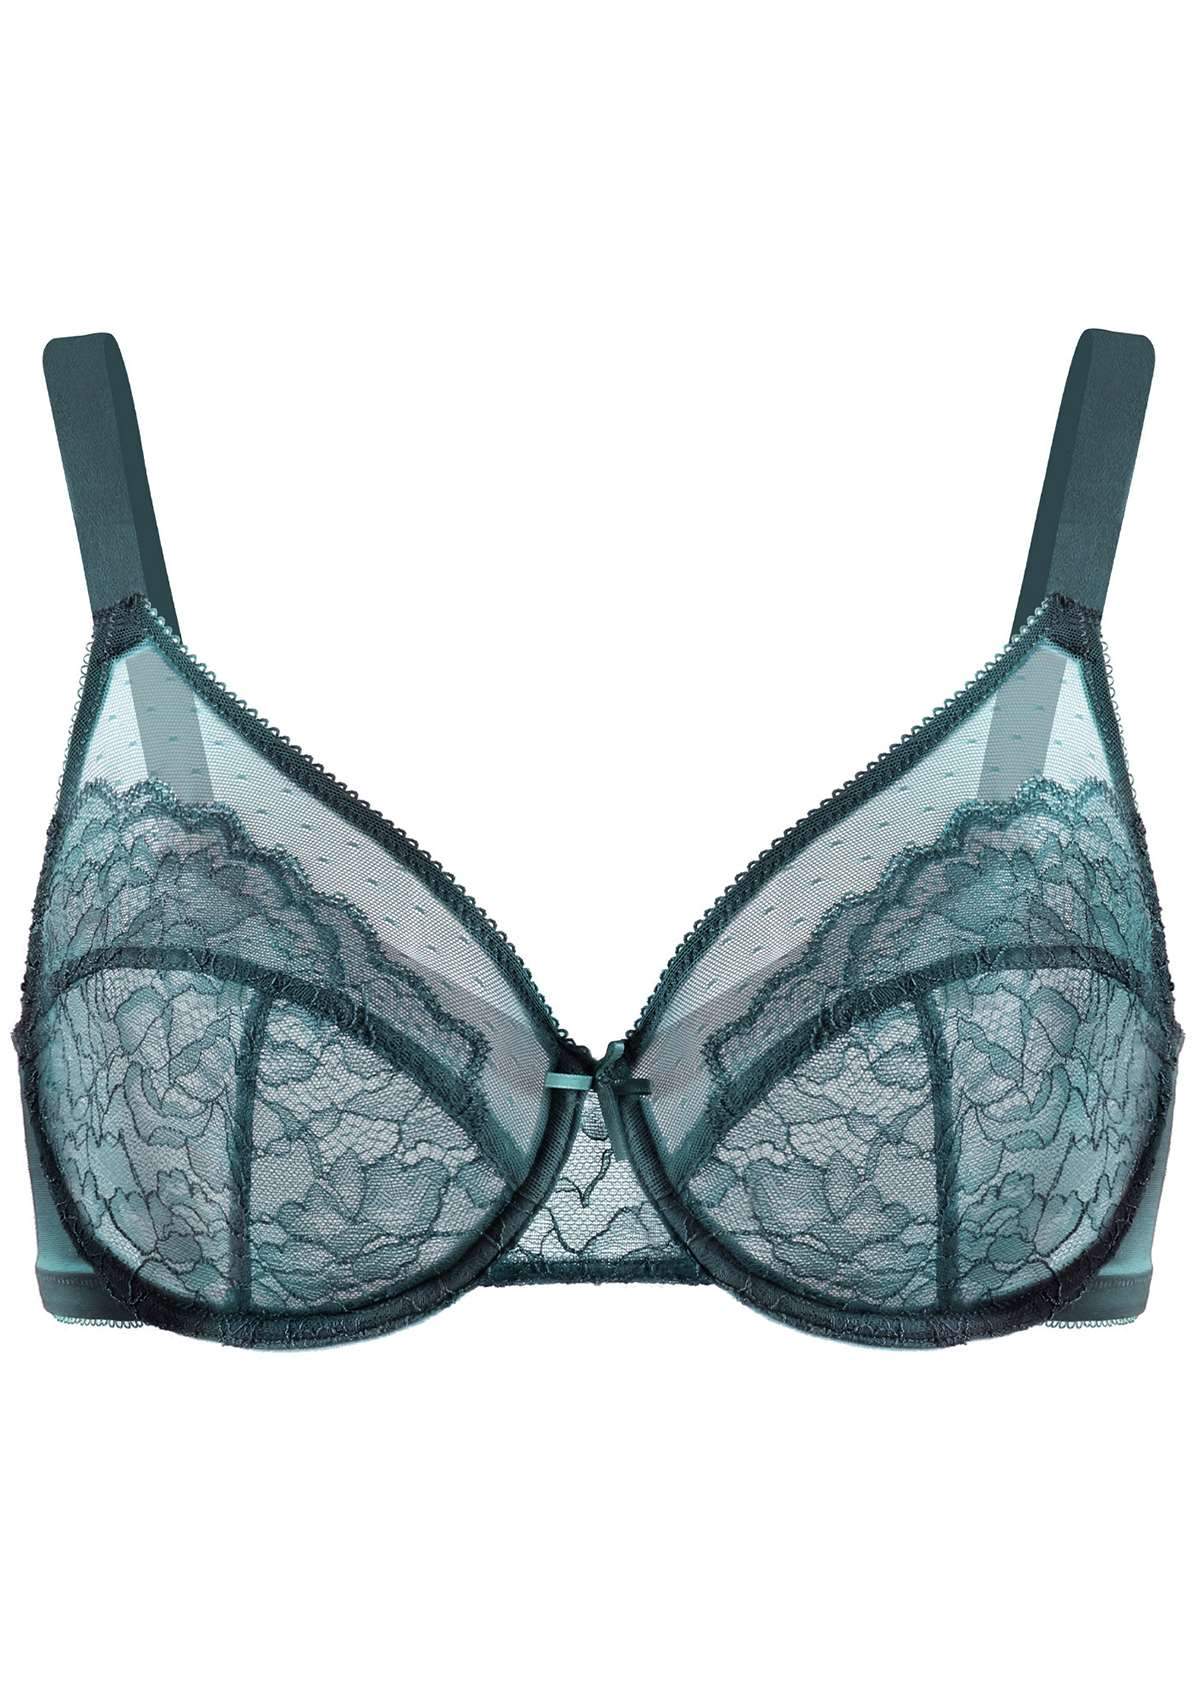 HSIA Enchante Full Coverage Bra: Supportive Bra For Big Busts - Balsam Blue / 36 / C